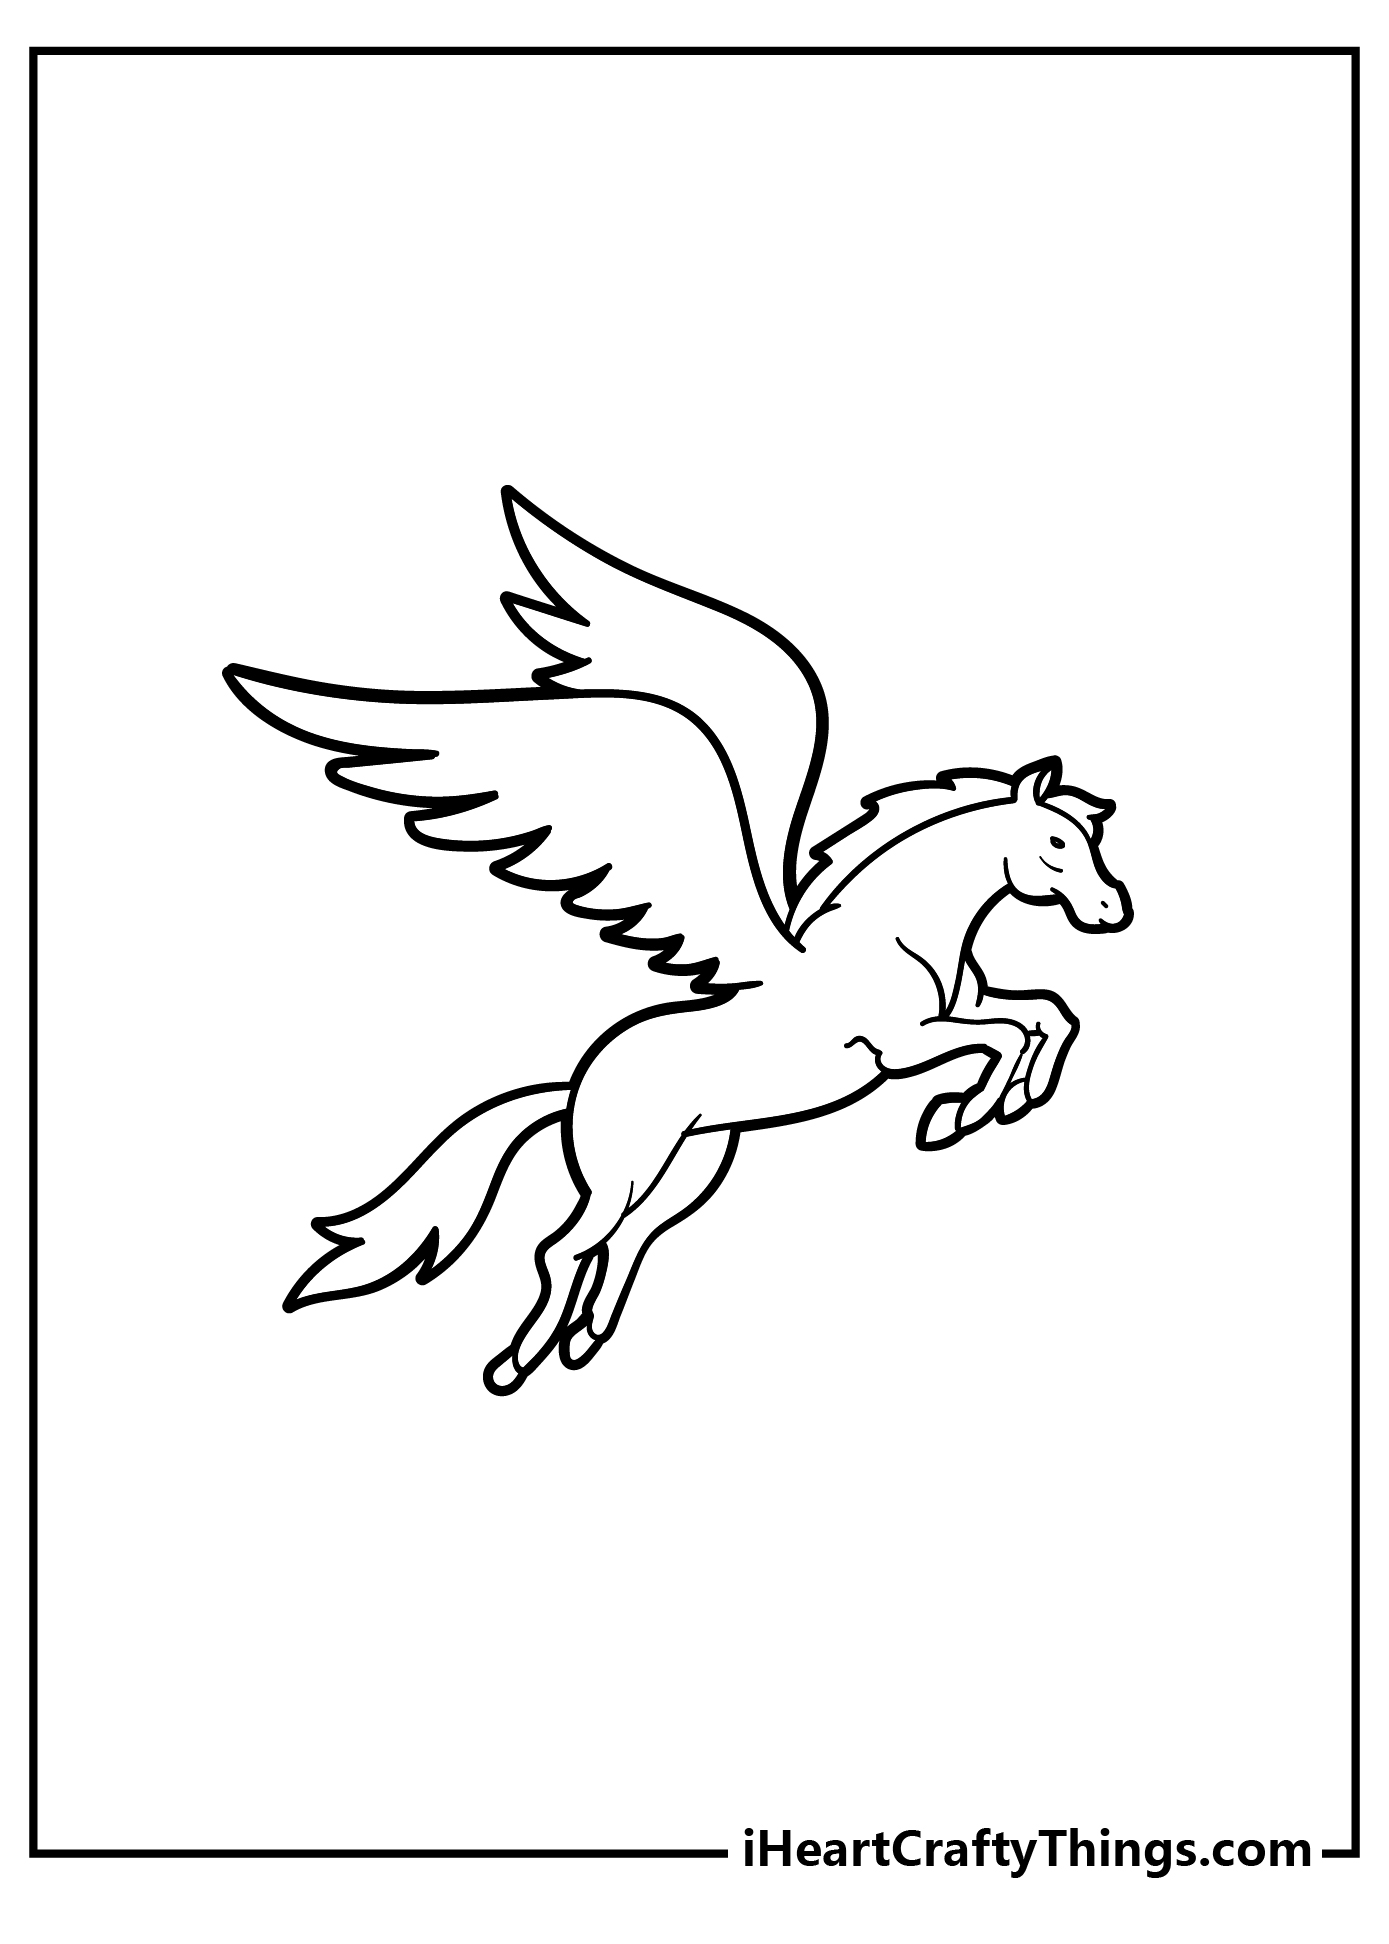 Pegasus Coloring Pages for preschoolers free printable